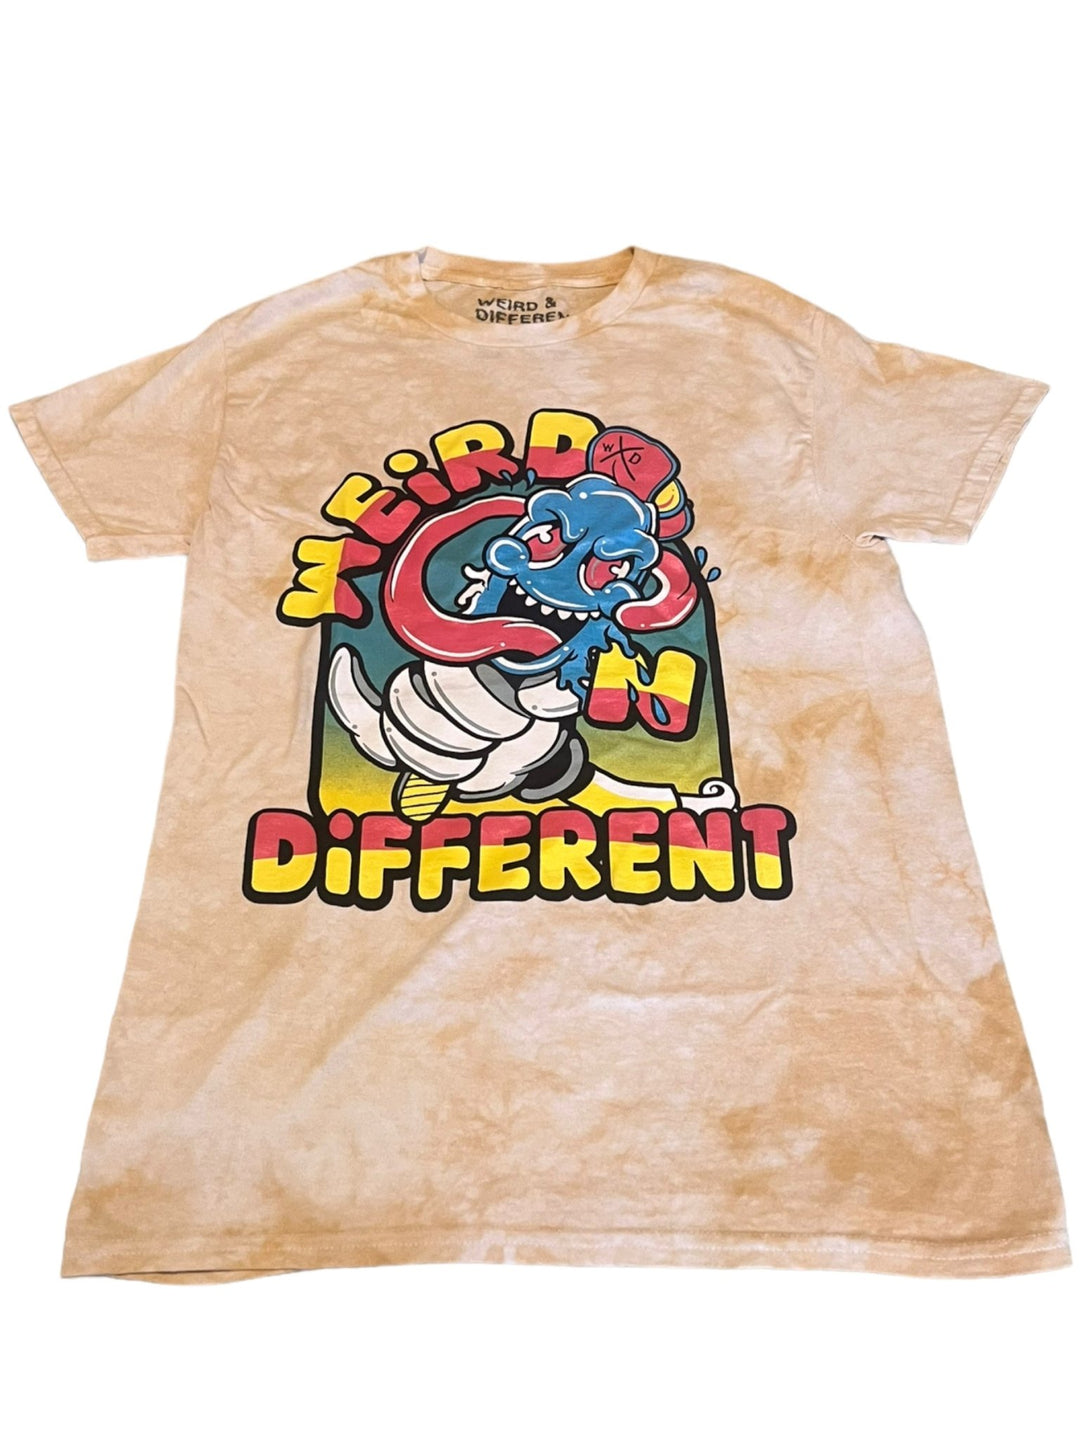 Local Menace Popsicle Tie dye tee - Weird & Different